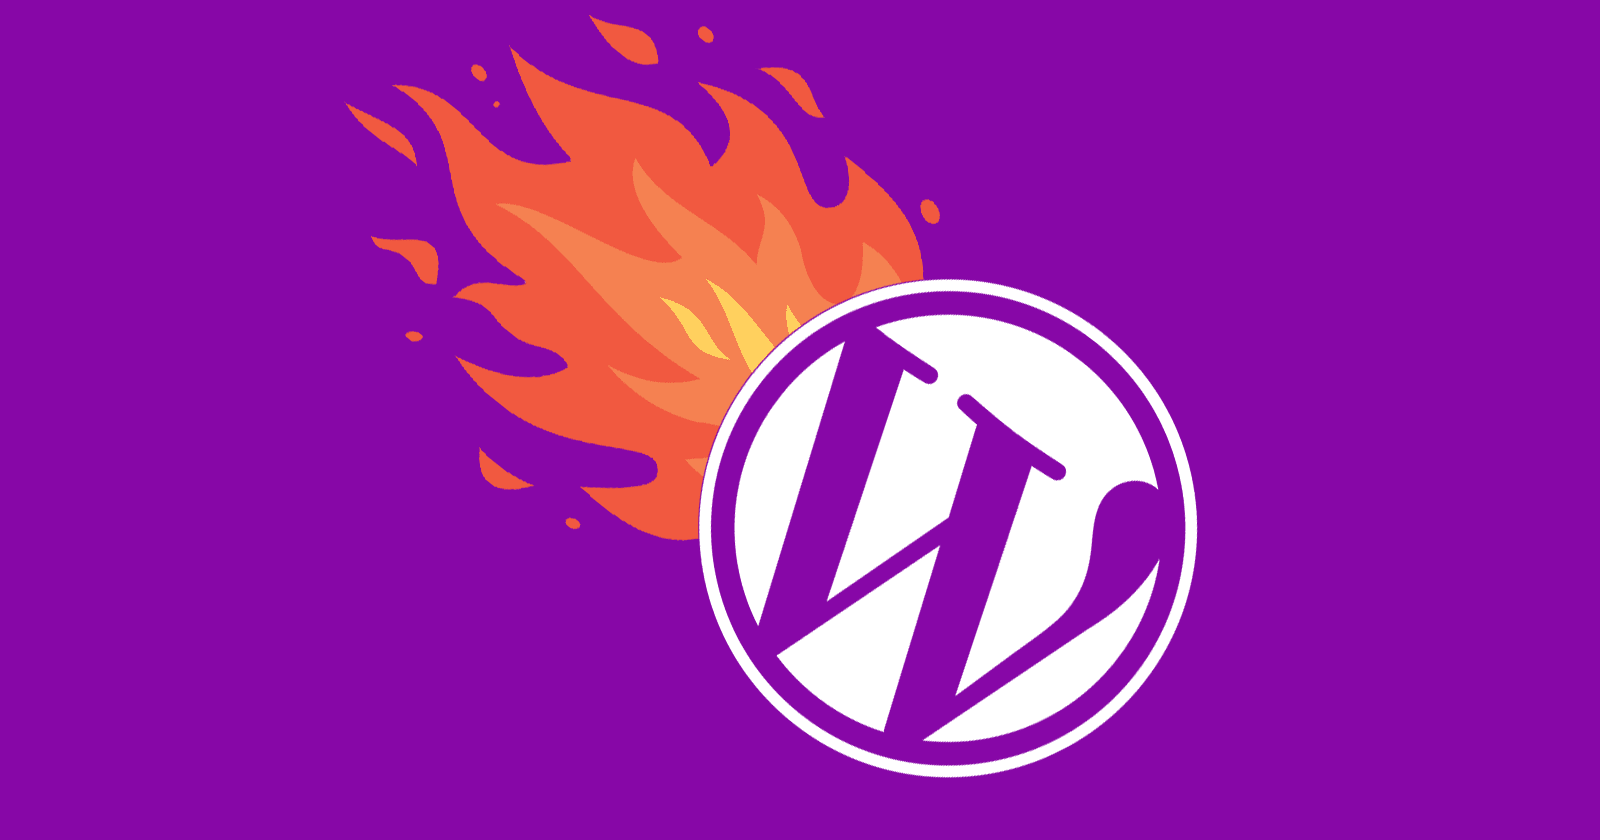 Image of the WordPress logo with flames shooting out of it